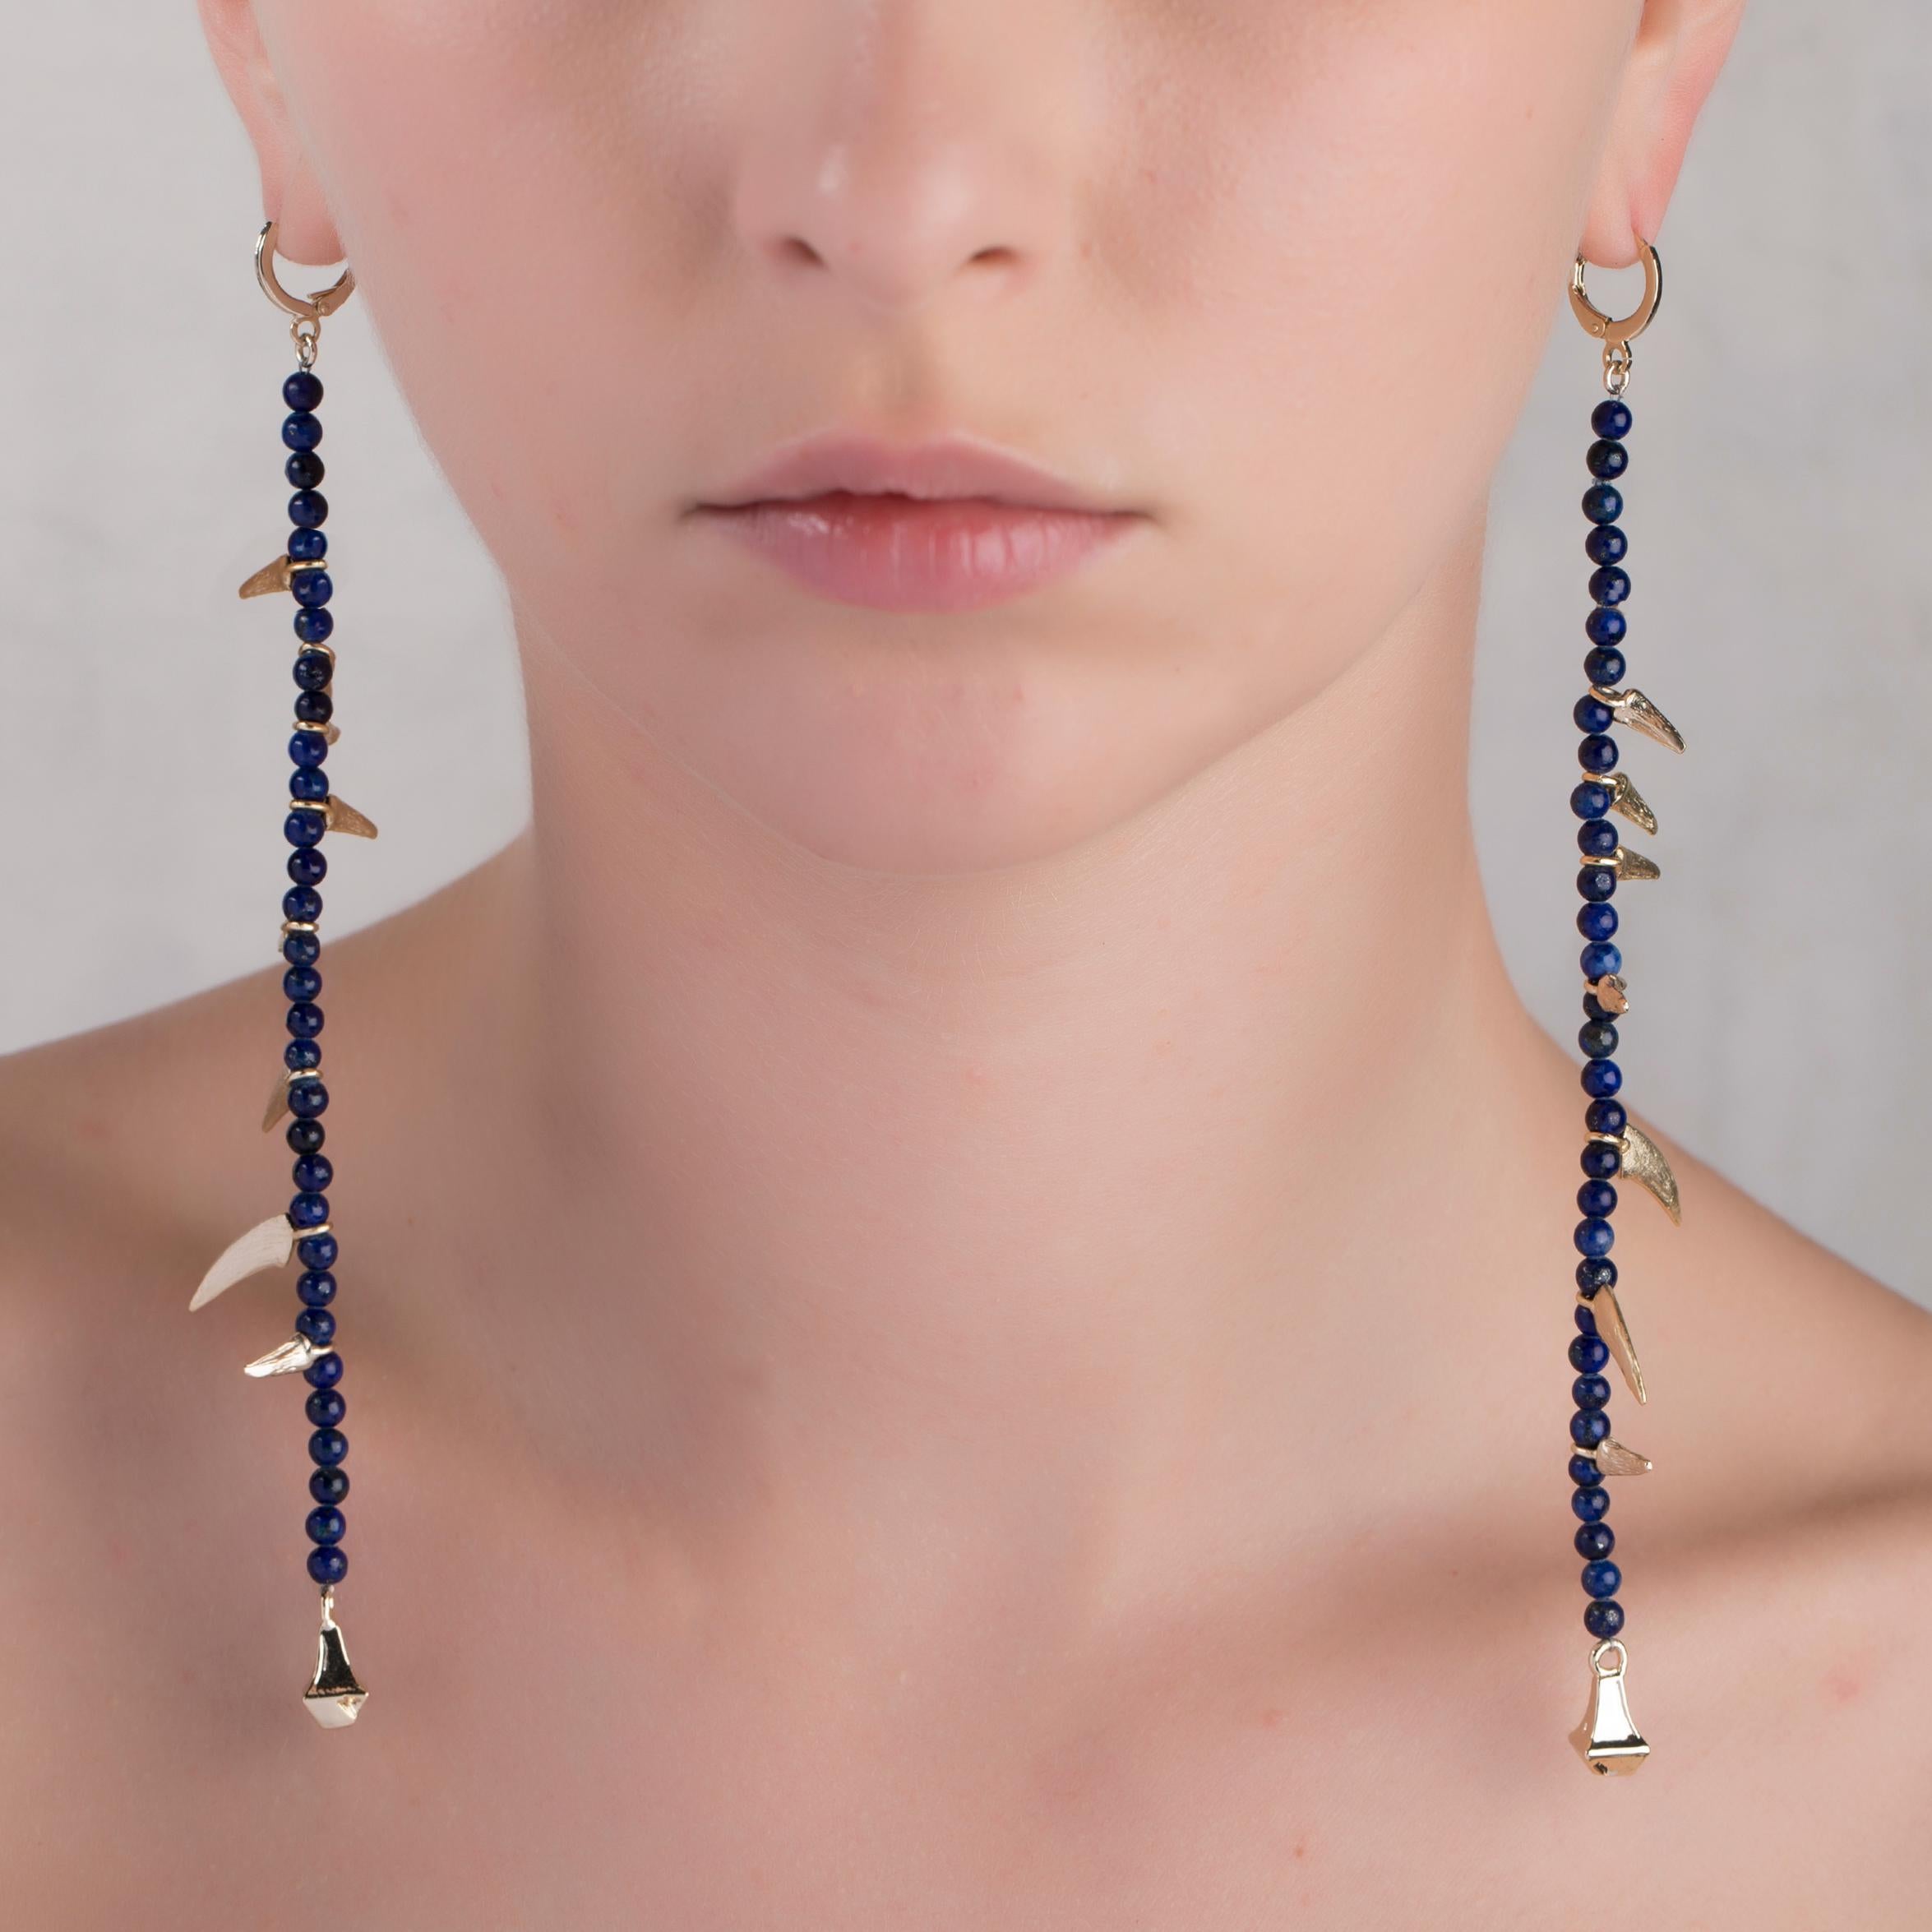 Round Cut Lapis Lazuli Beads Necklace with Dangling Claws from IOSSELLIANI For Sale